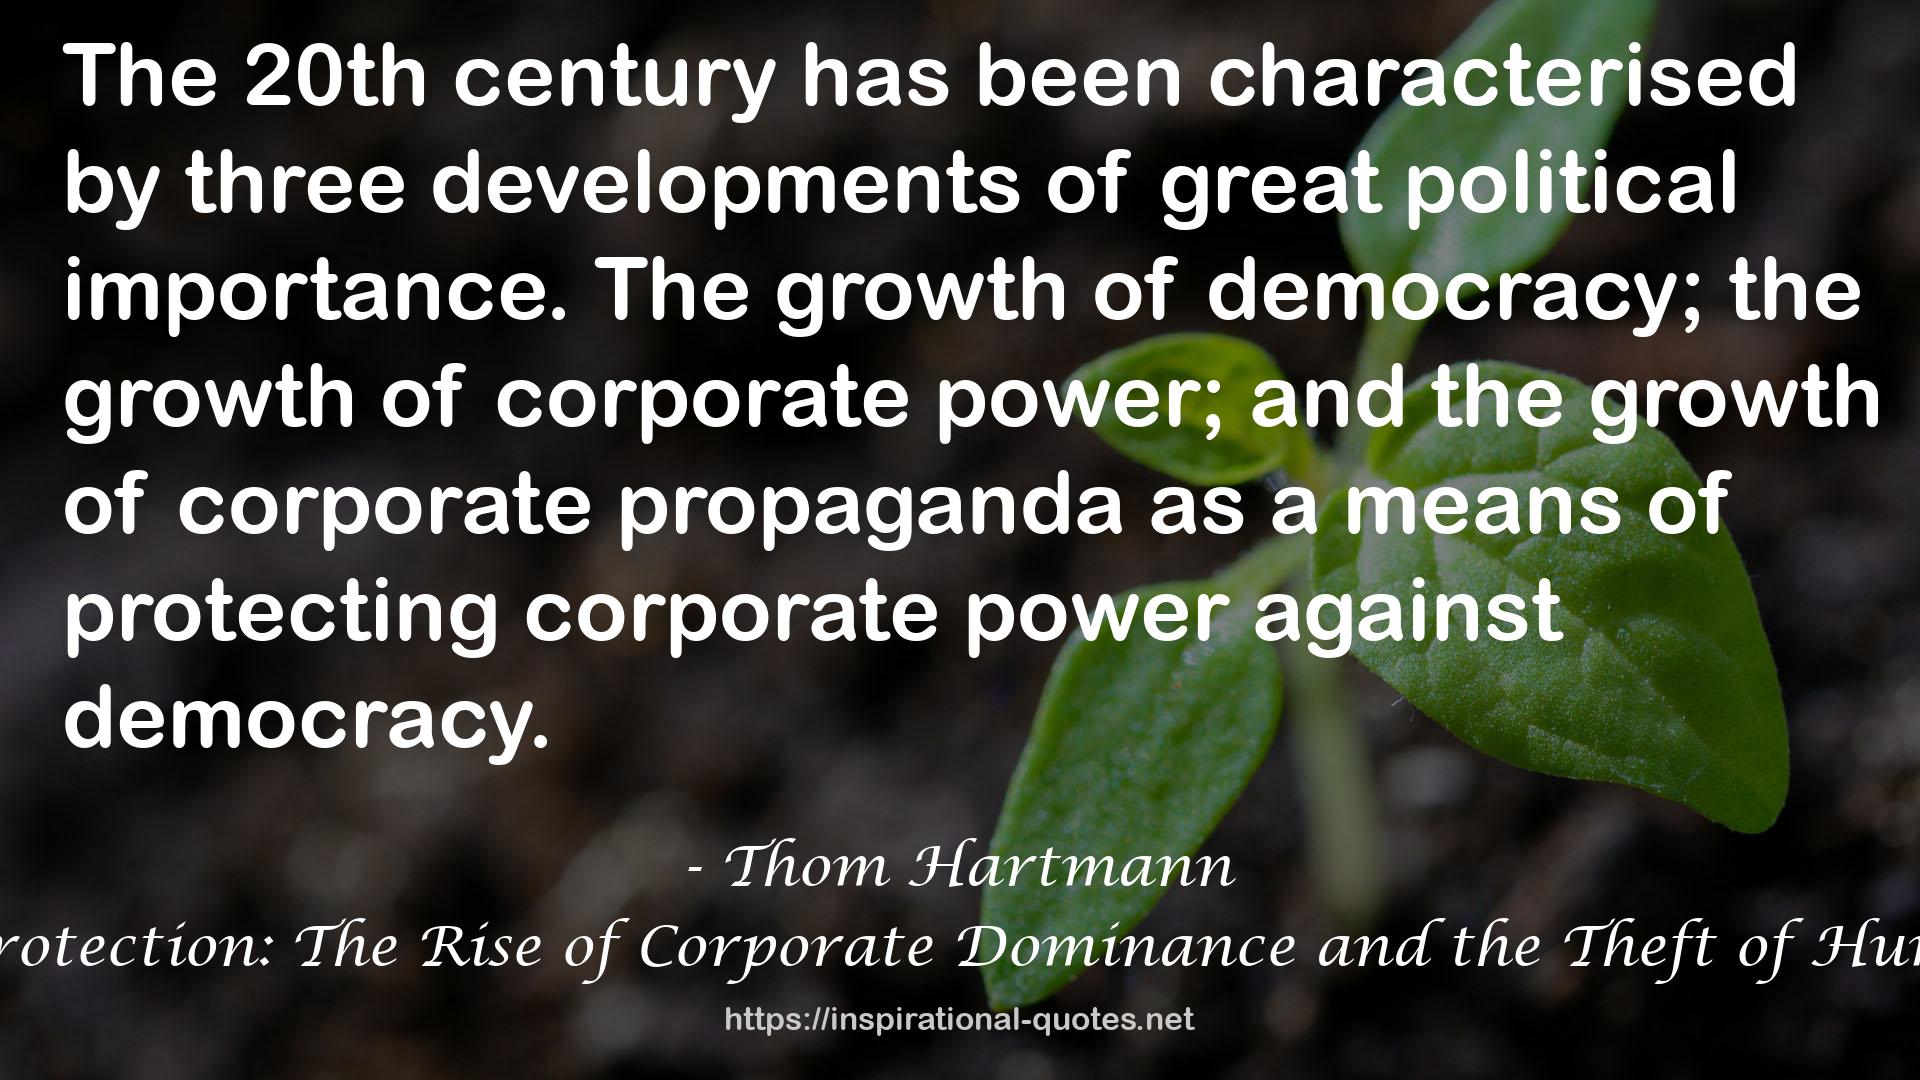 Unequal Protection: The Rise of Corporate Dominance and the Theft of Human Rights QUOTES